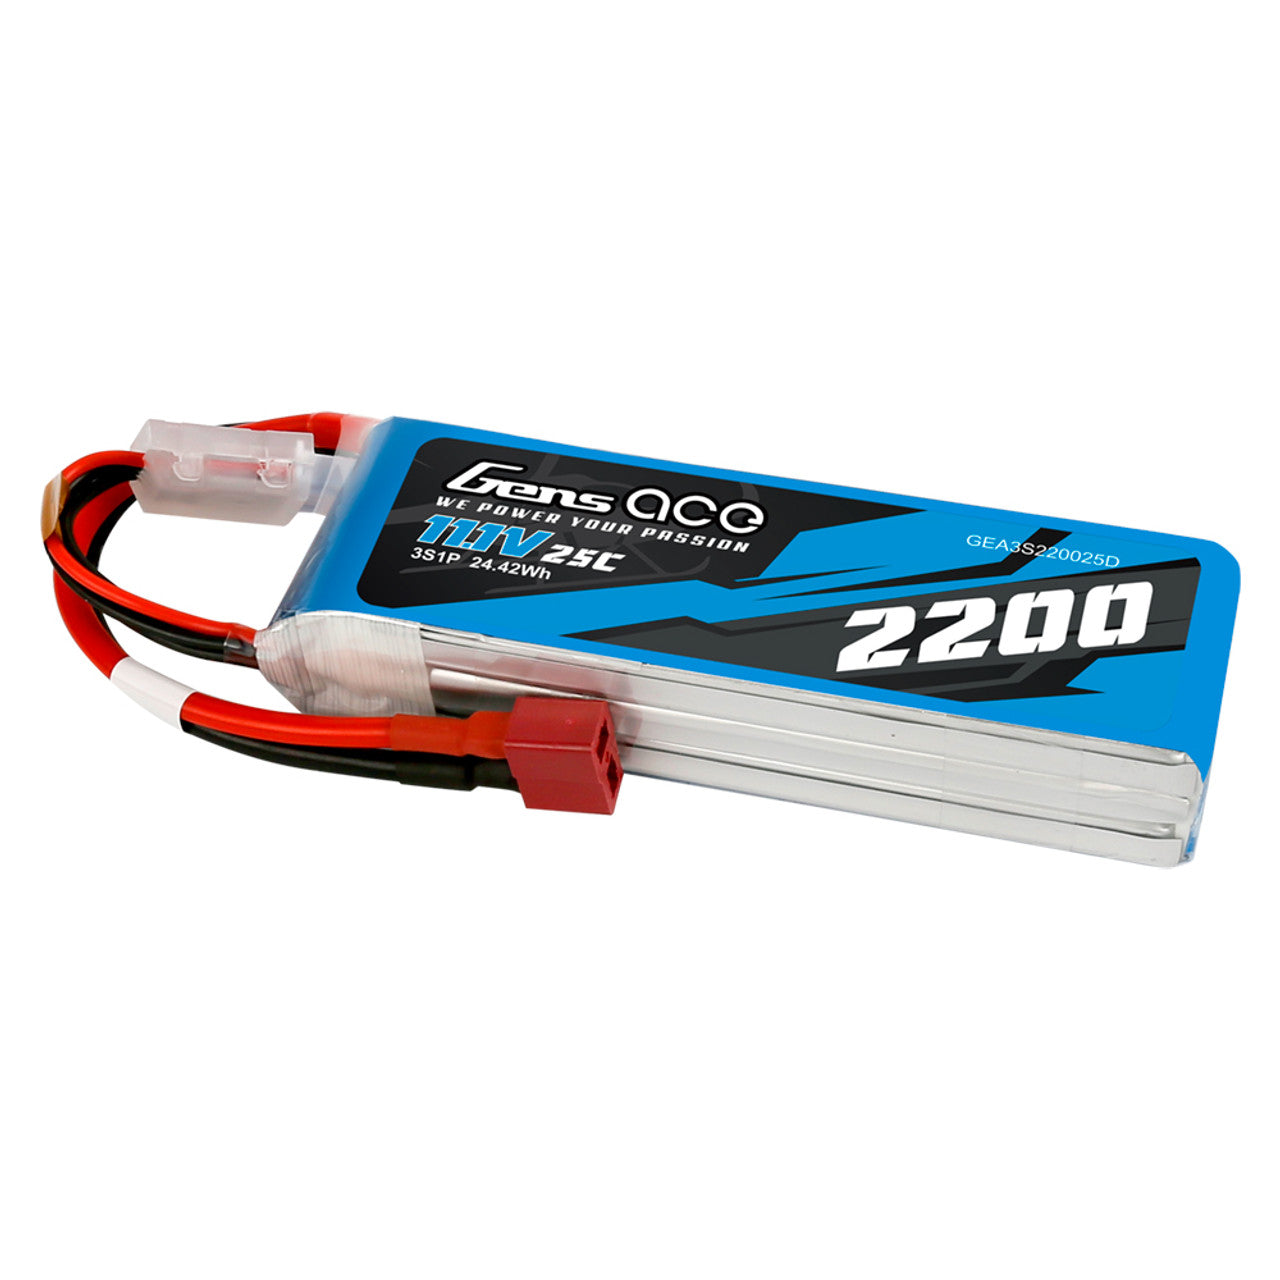 Gens ace 2200mAh 3S 11.1V 25C Lipo Battery Pack with Deans plug